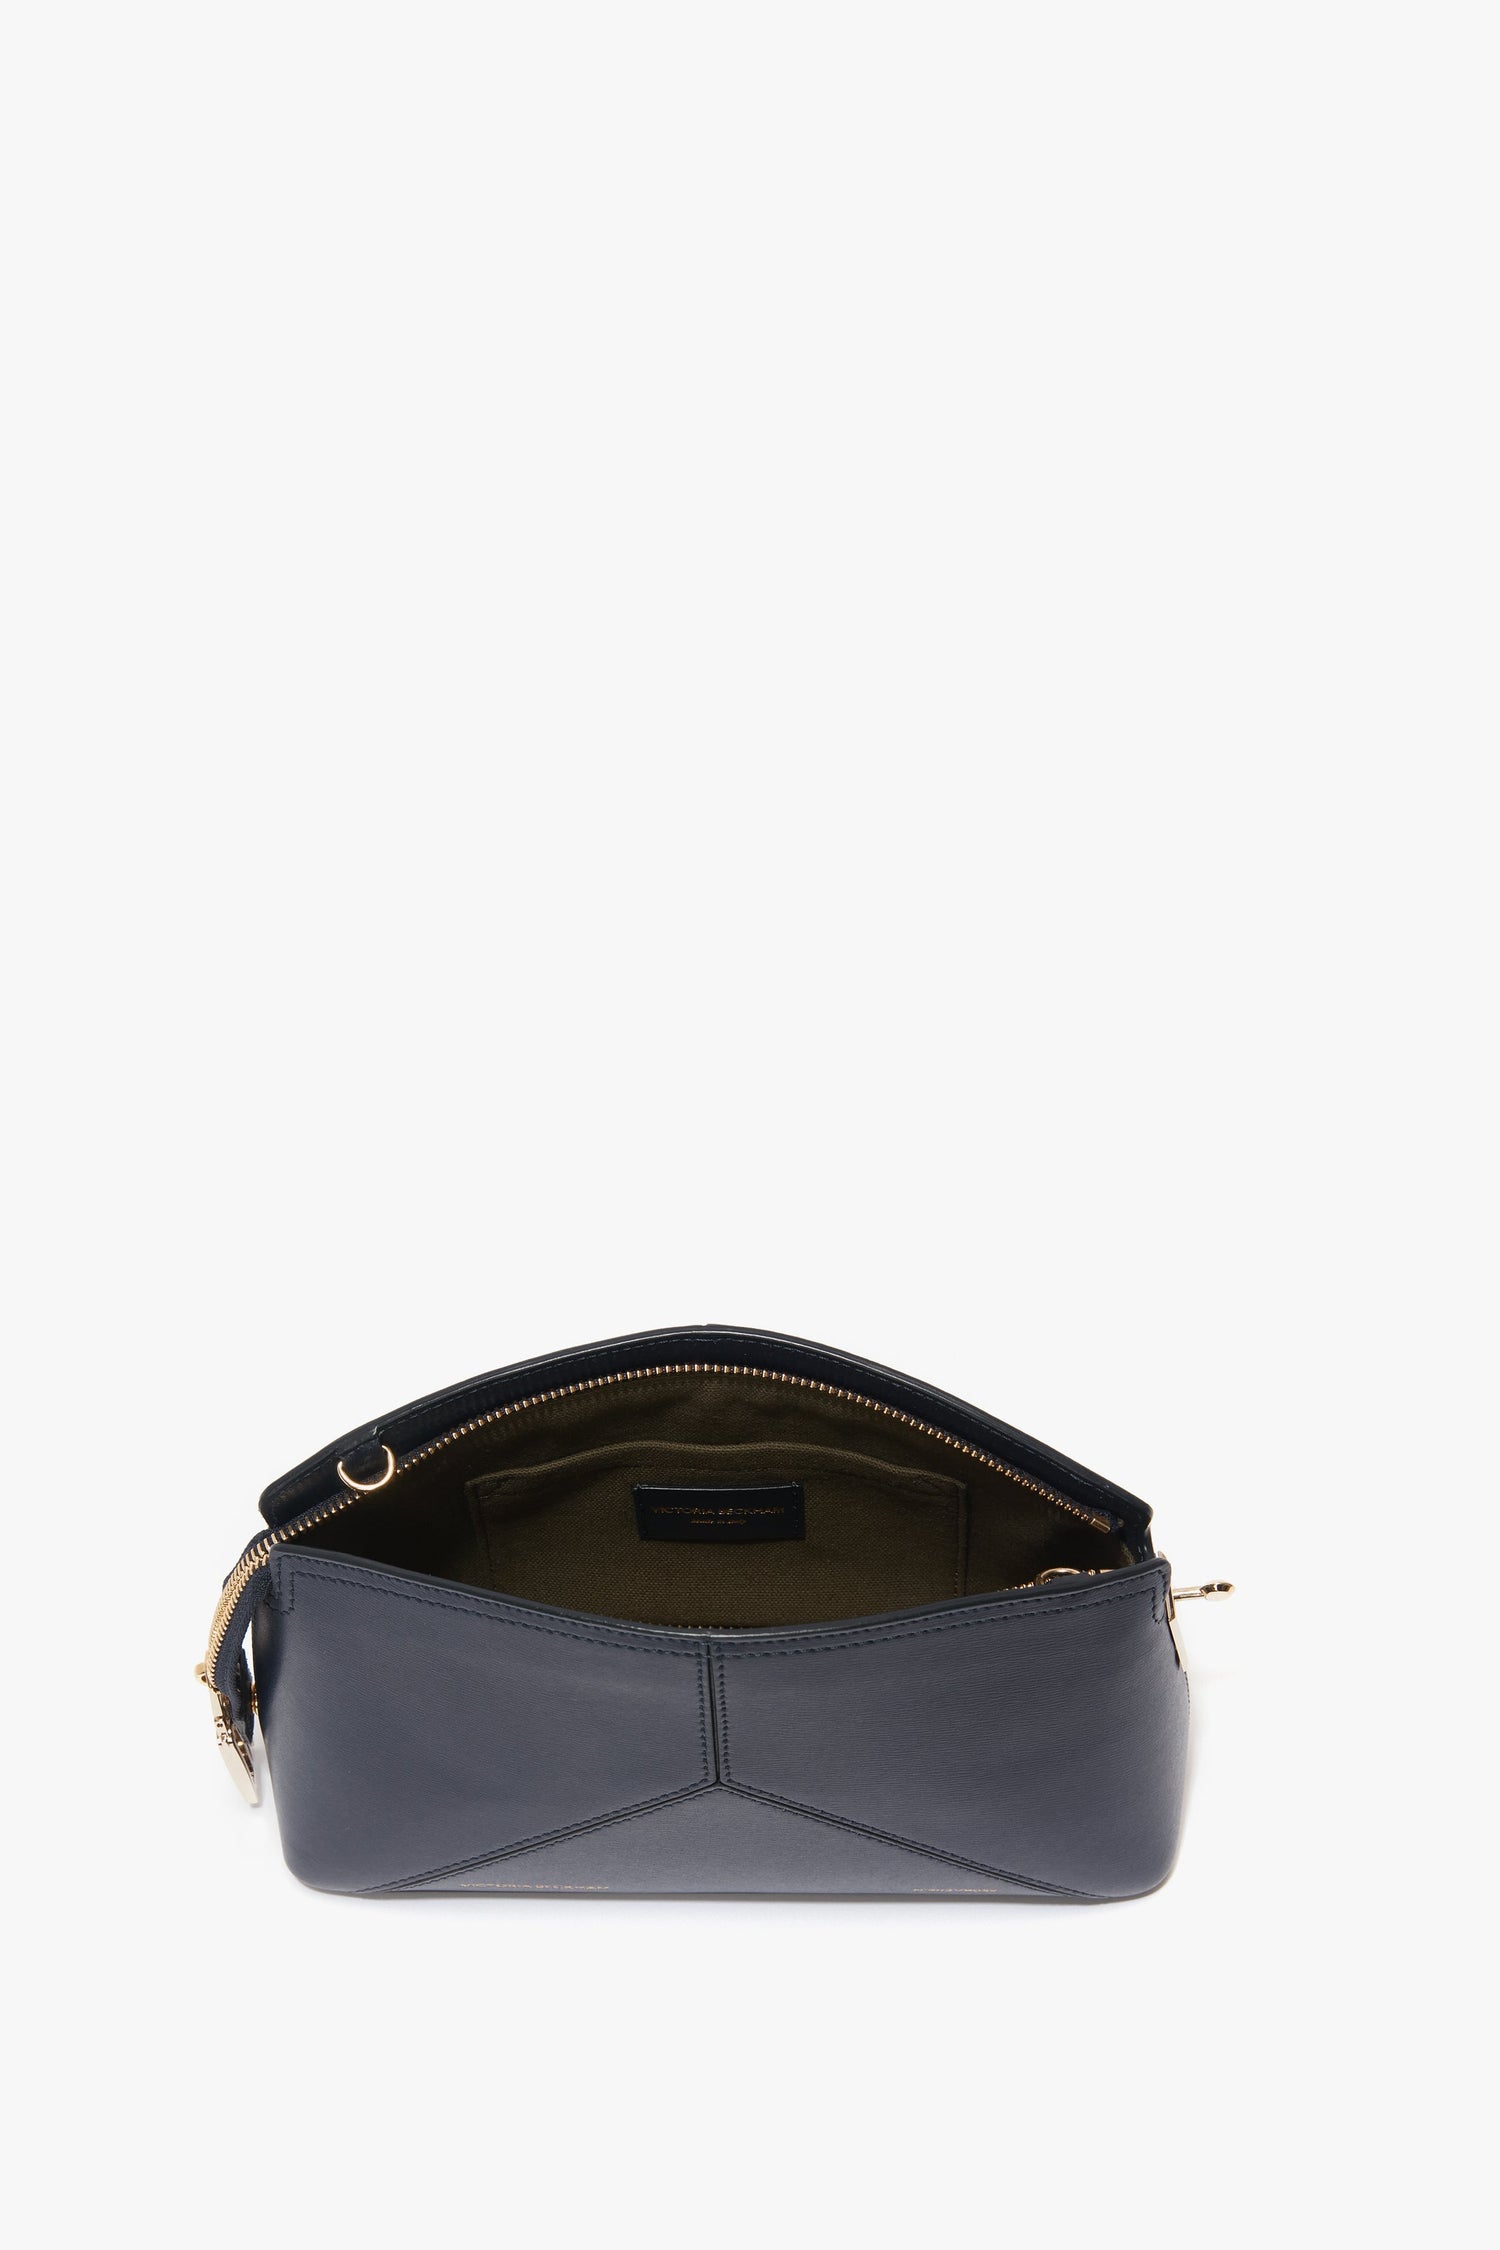 A black leather handbag is shown with its zipper open, displaying an empty beige interior. The Exclusive Victoria Crossbody Bag In Navy Leather by Victoria Beckham, a fine piece of leather goods, features gold hardware and a structured shape reminiscent of a sophisticated clutch bag.